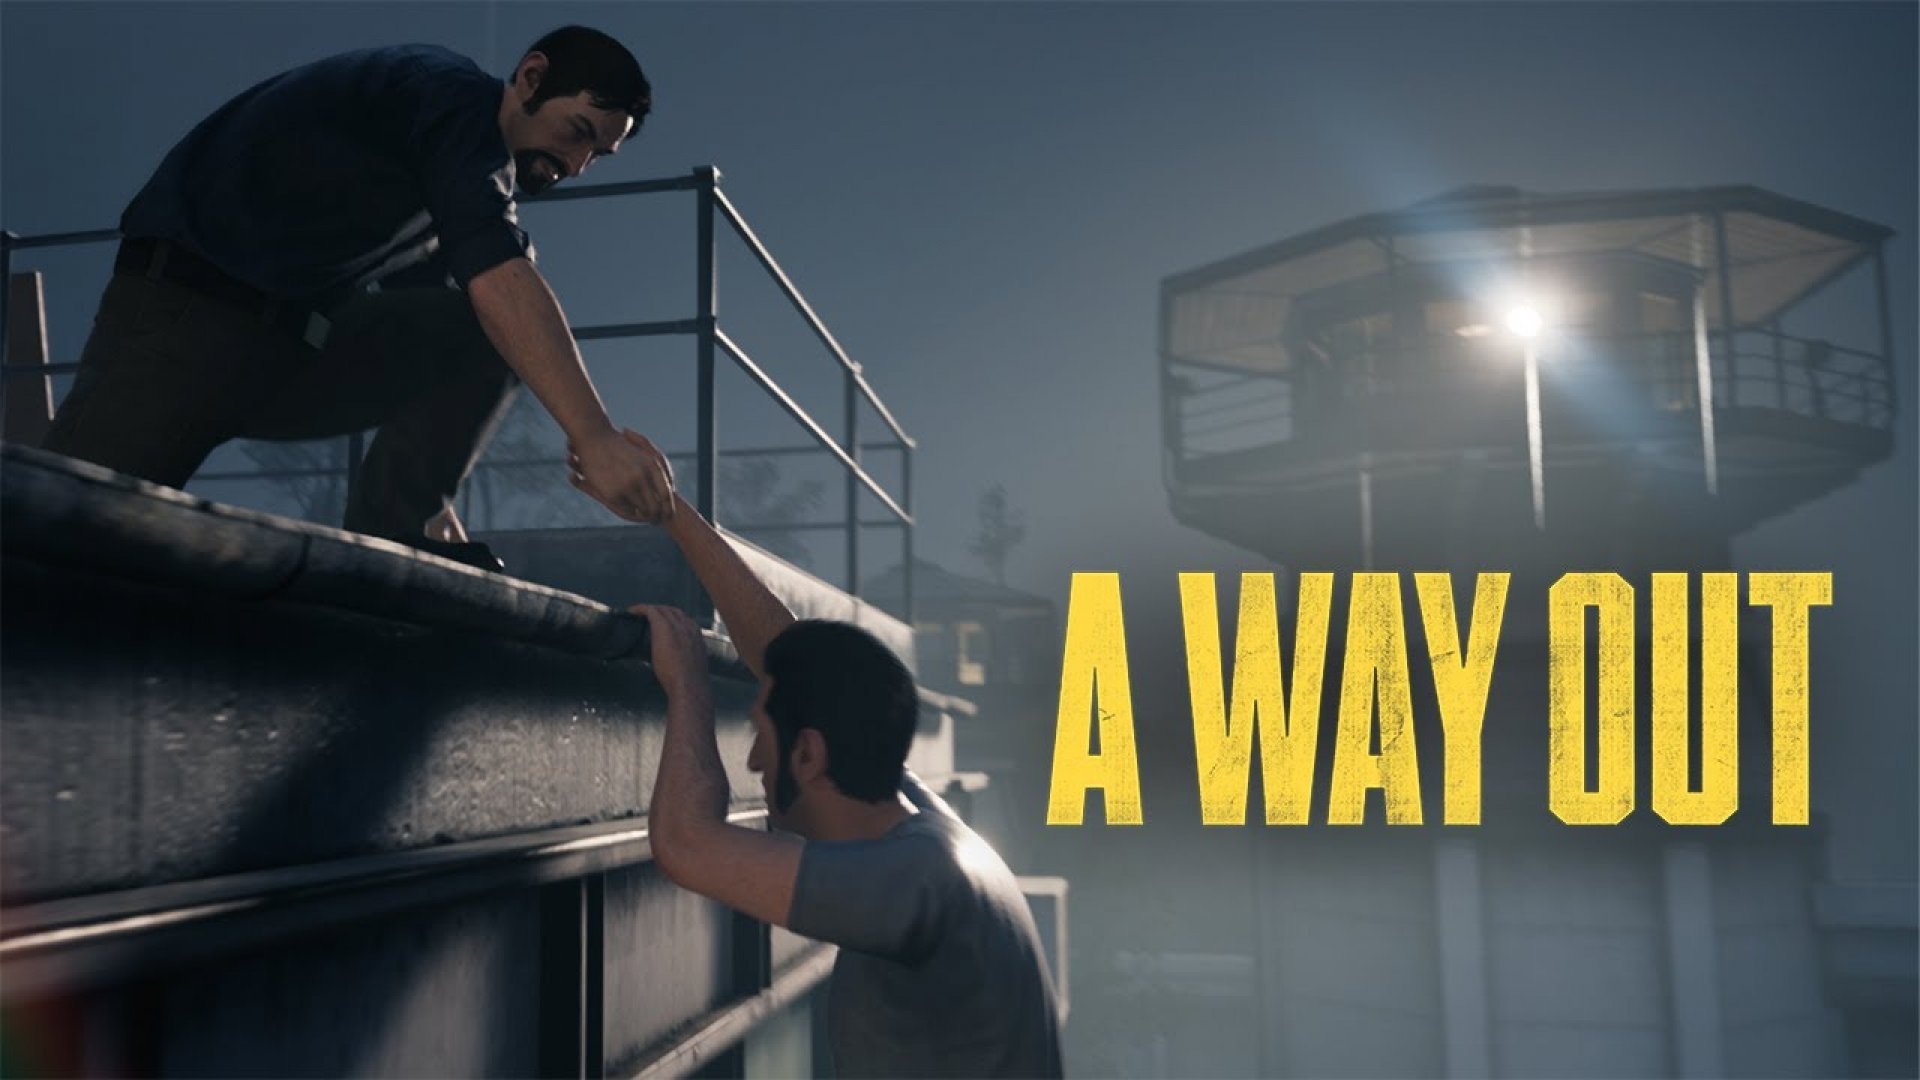 A want to get a way. Way out игра. Побег из тюрьмы a way out. А Wаy оut игра. A way AOT.